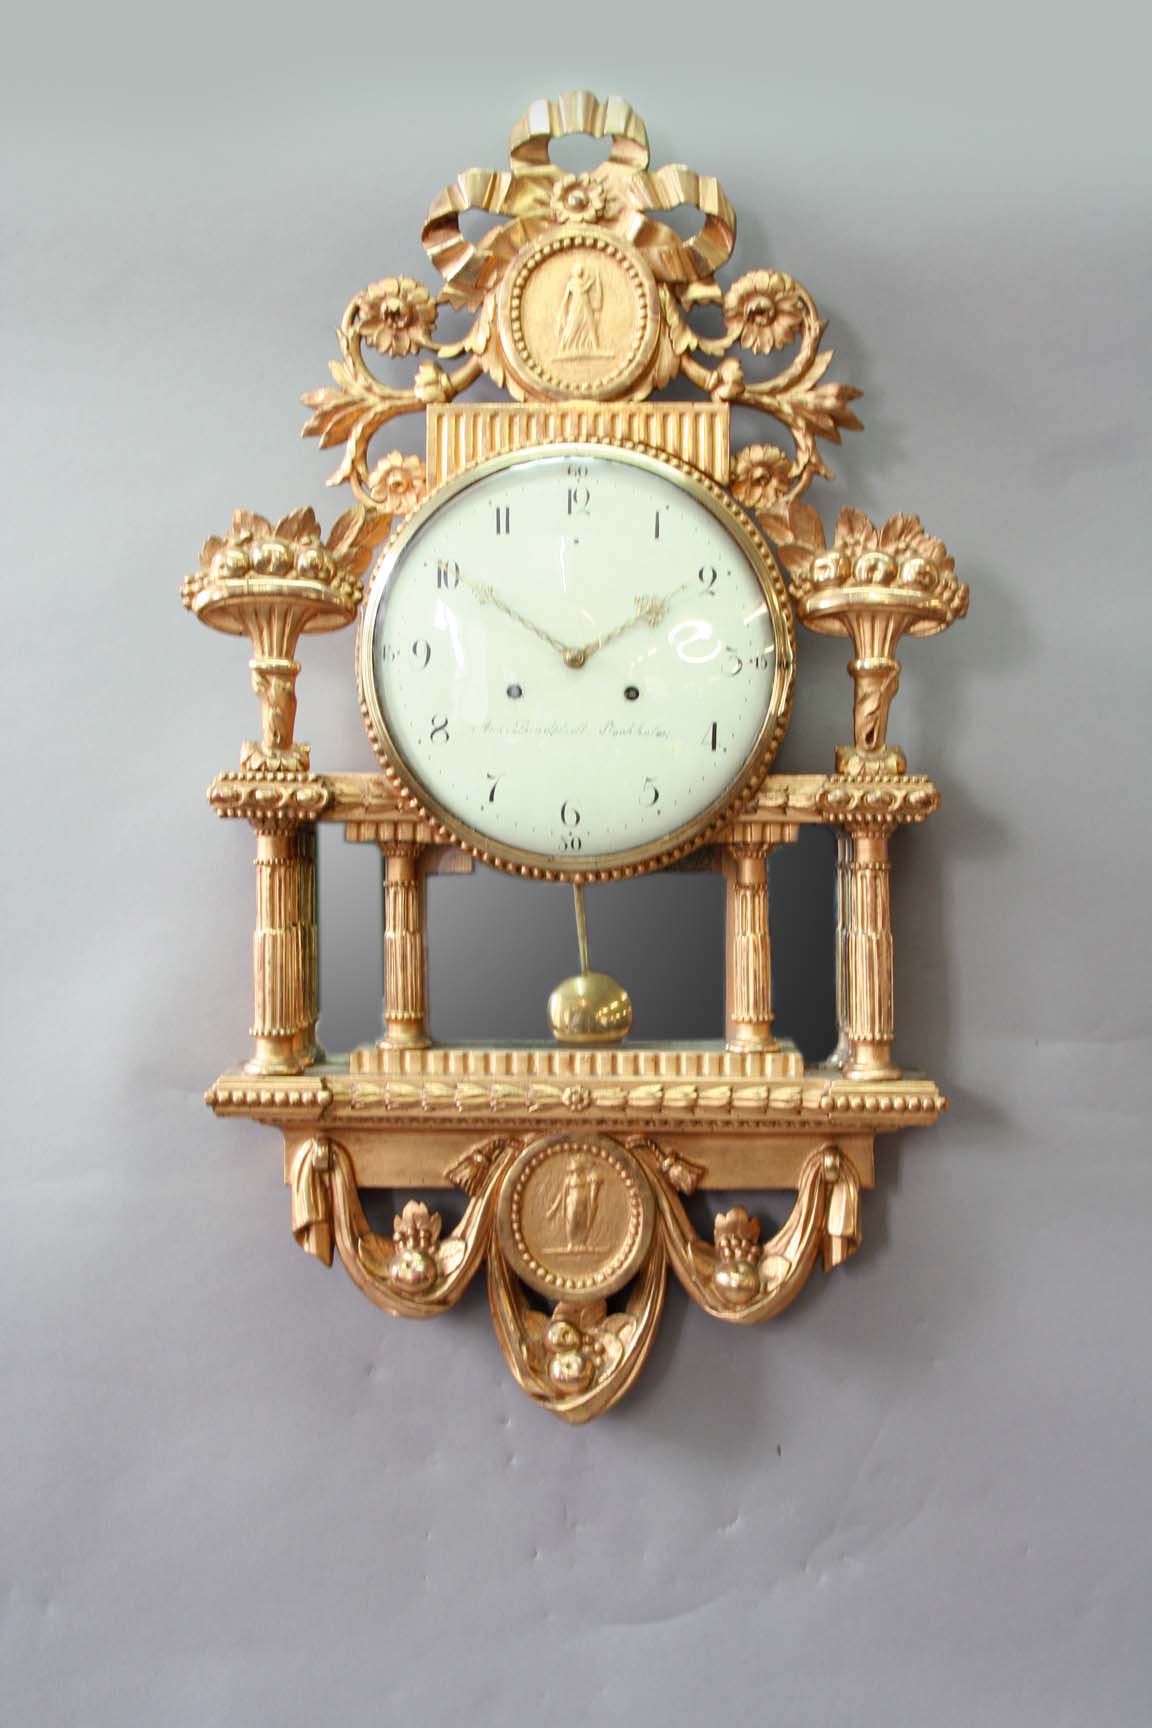 AN 18TH CENTURY SWEDISH GILTWOOD WALL CLOCK dial cream enamel, signed And..Lundfledl. Stockholm,